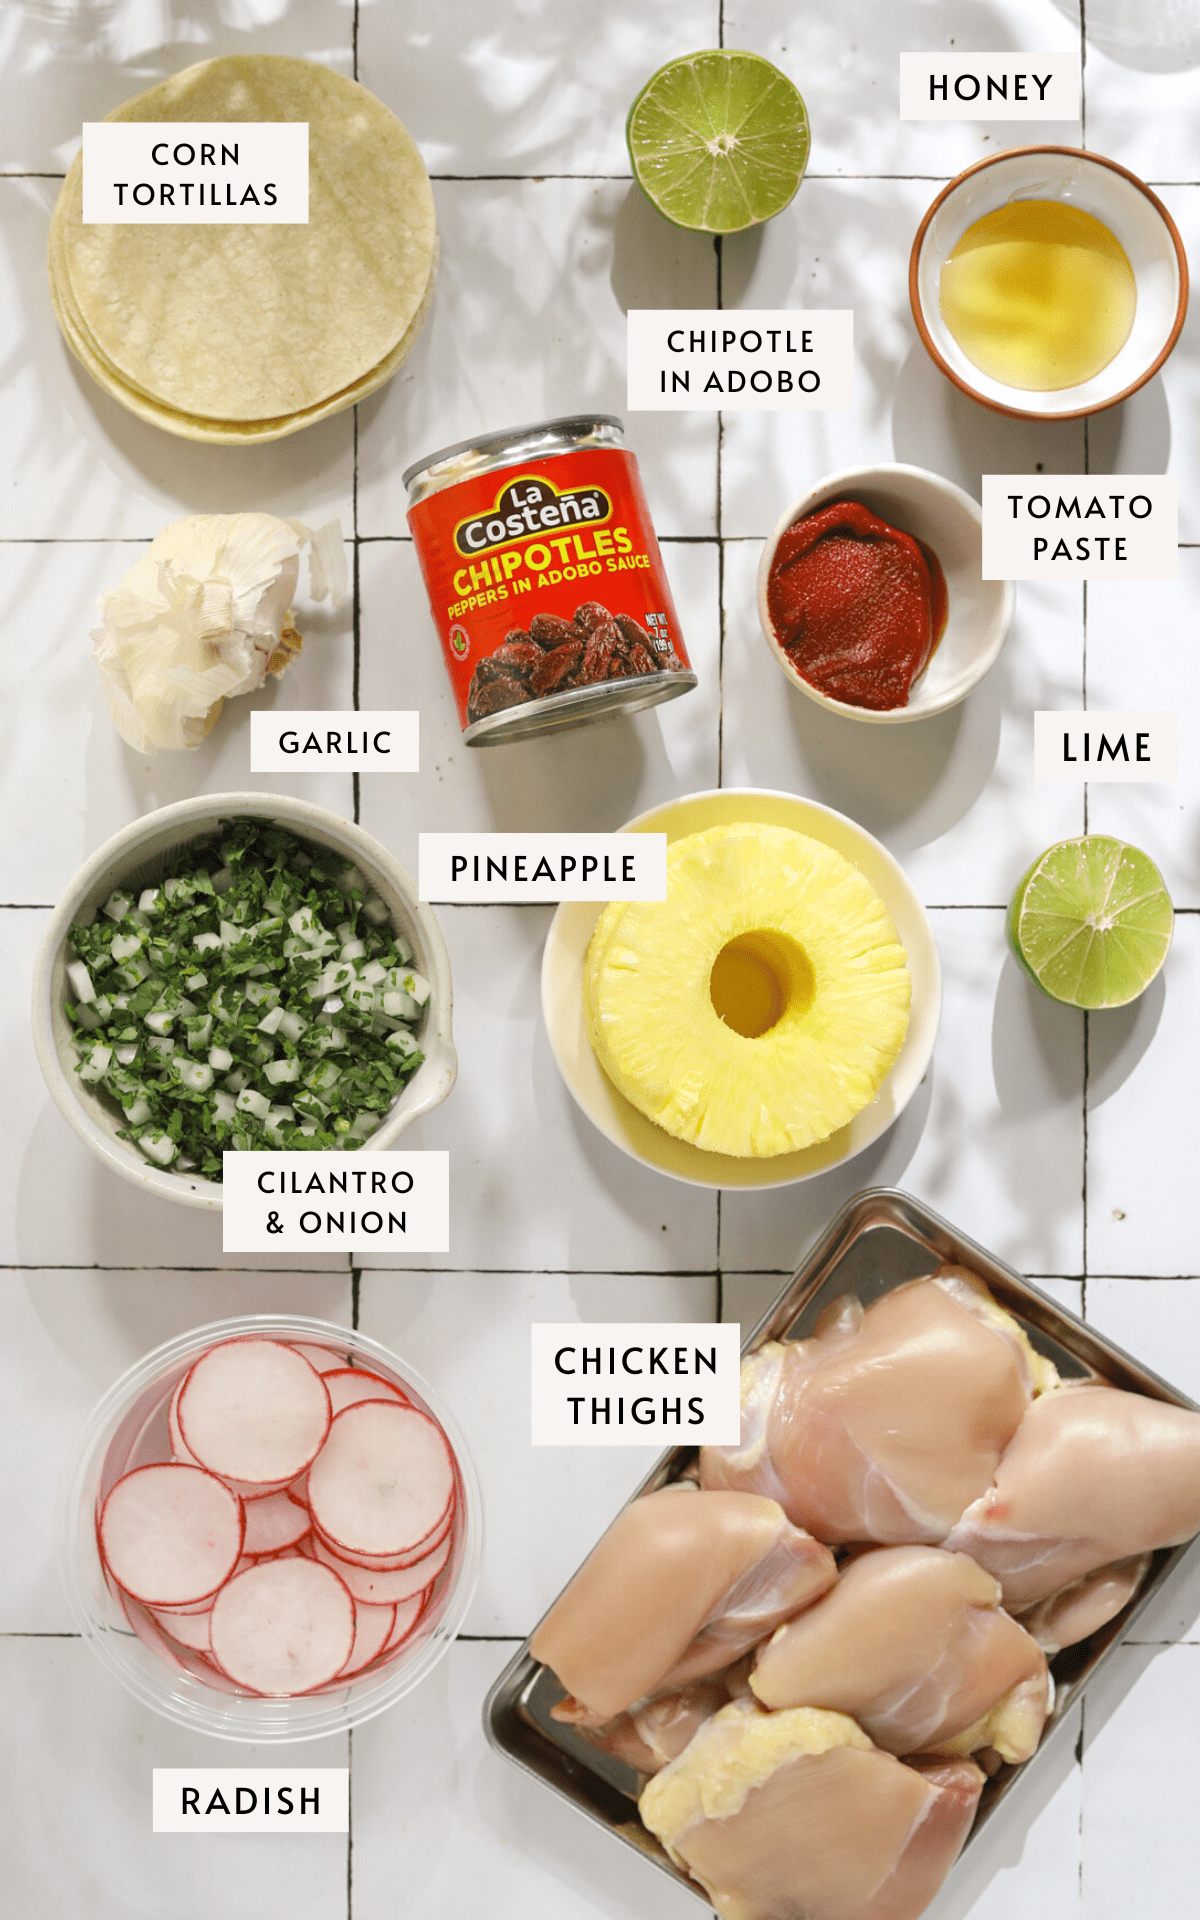 A stack of corn tortillas, small bowls of ingredients like; tomato paste, honey, sliced radish, chopped cilantro and onion. A small white bowl of pineapple, a can of chipotle peppers and a tray of raw chicken.